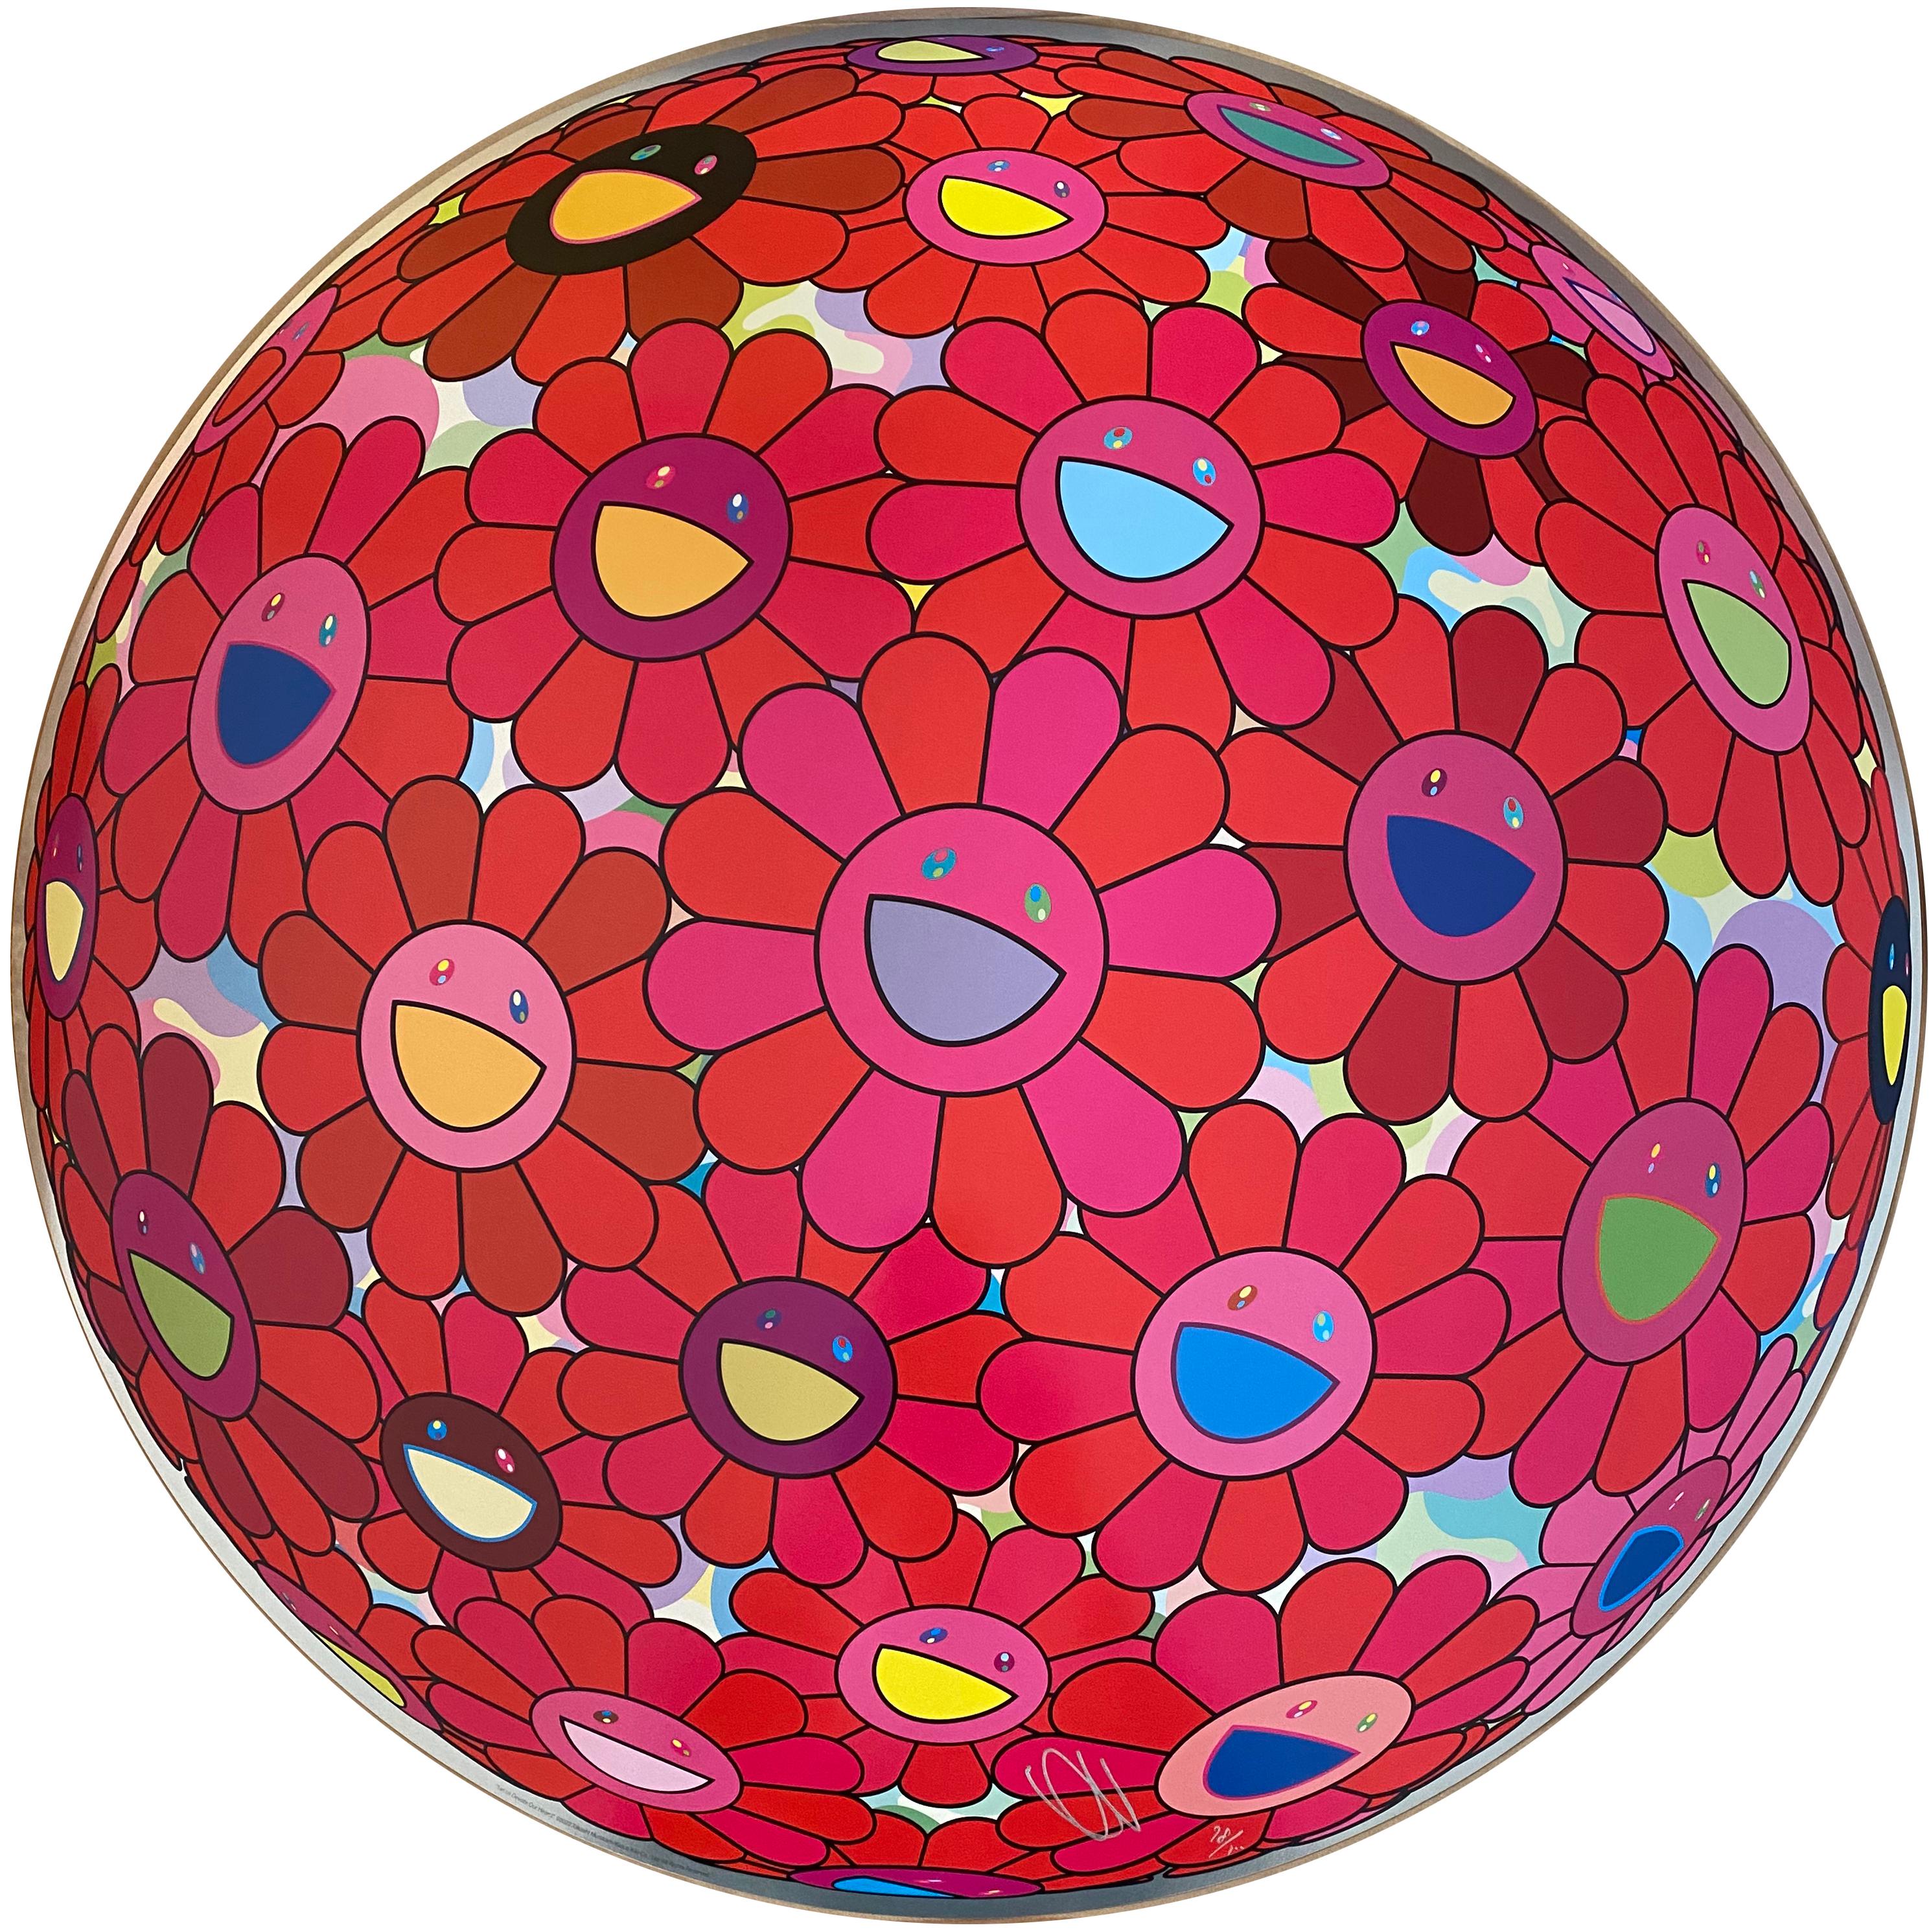 Takashi Murakami - Let us Devote Our Hearts - collectible limited edition of 300